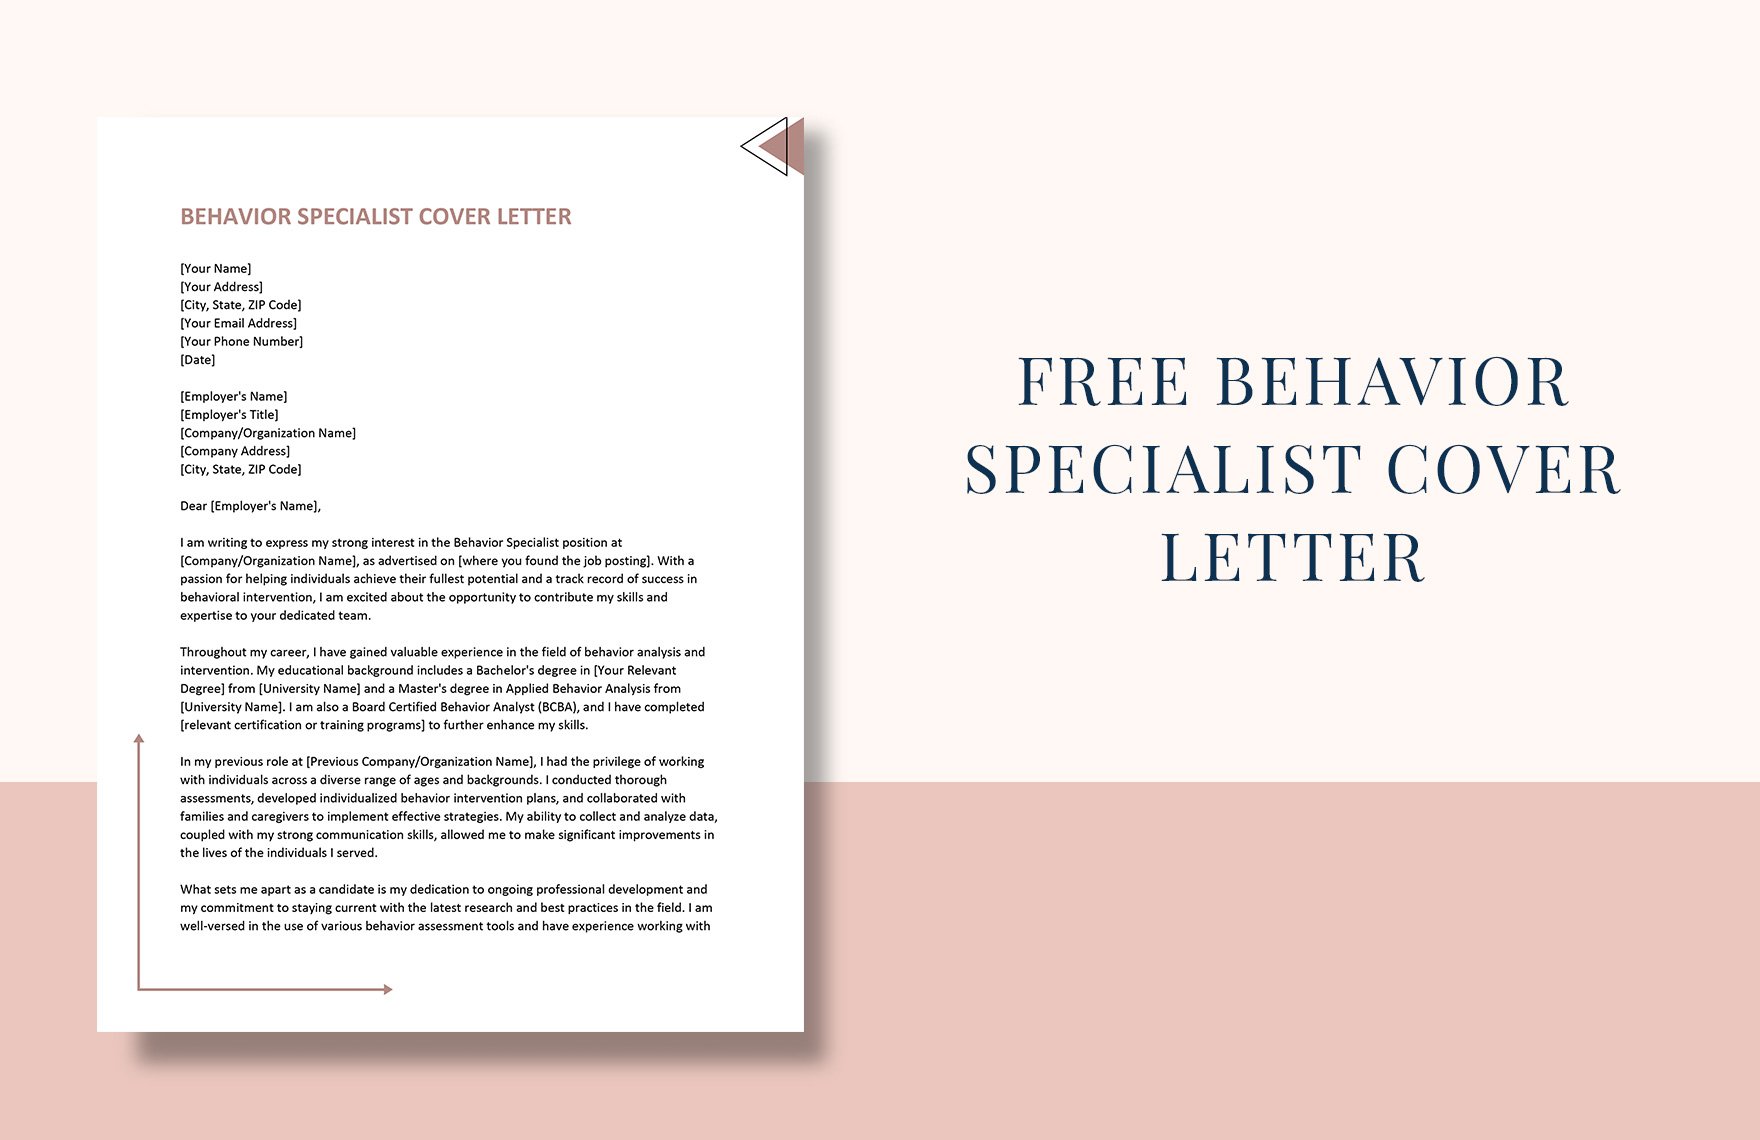 Behavior Specialist Cover Letter in Word, Google Docs, Apple Pages